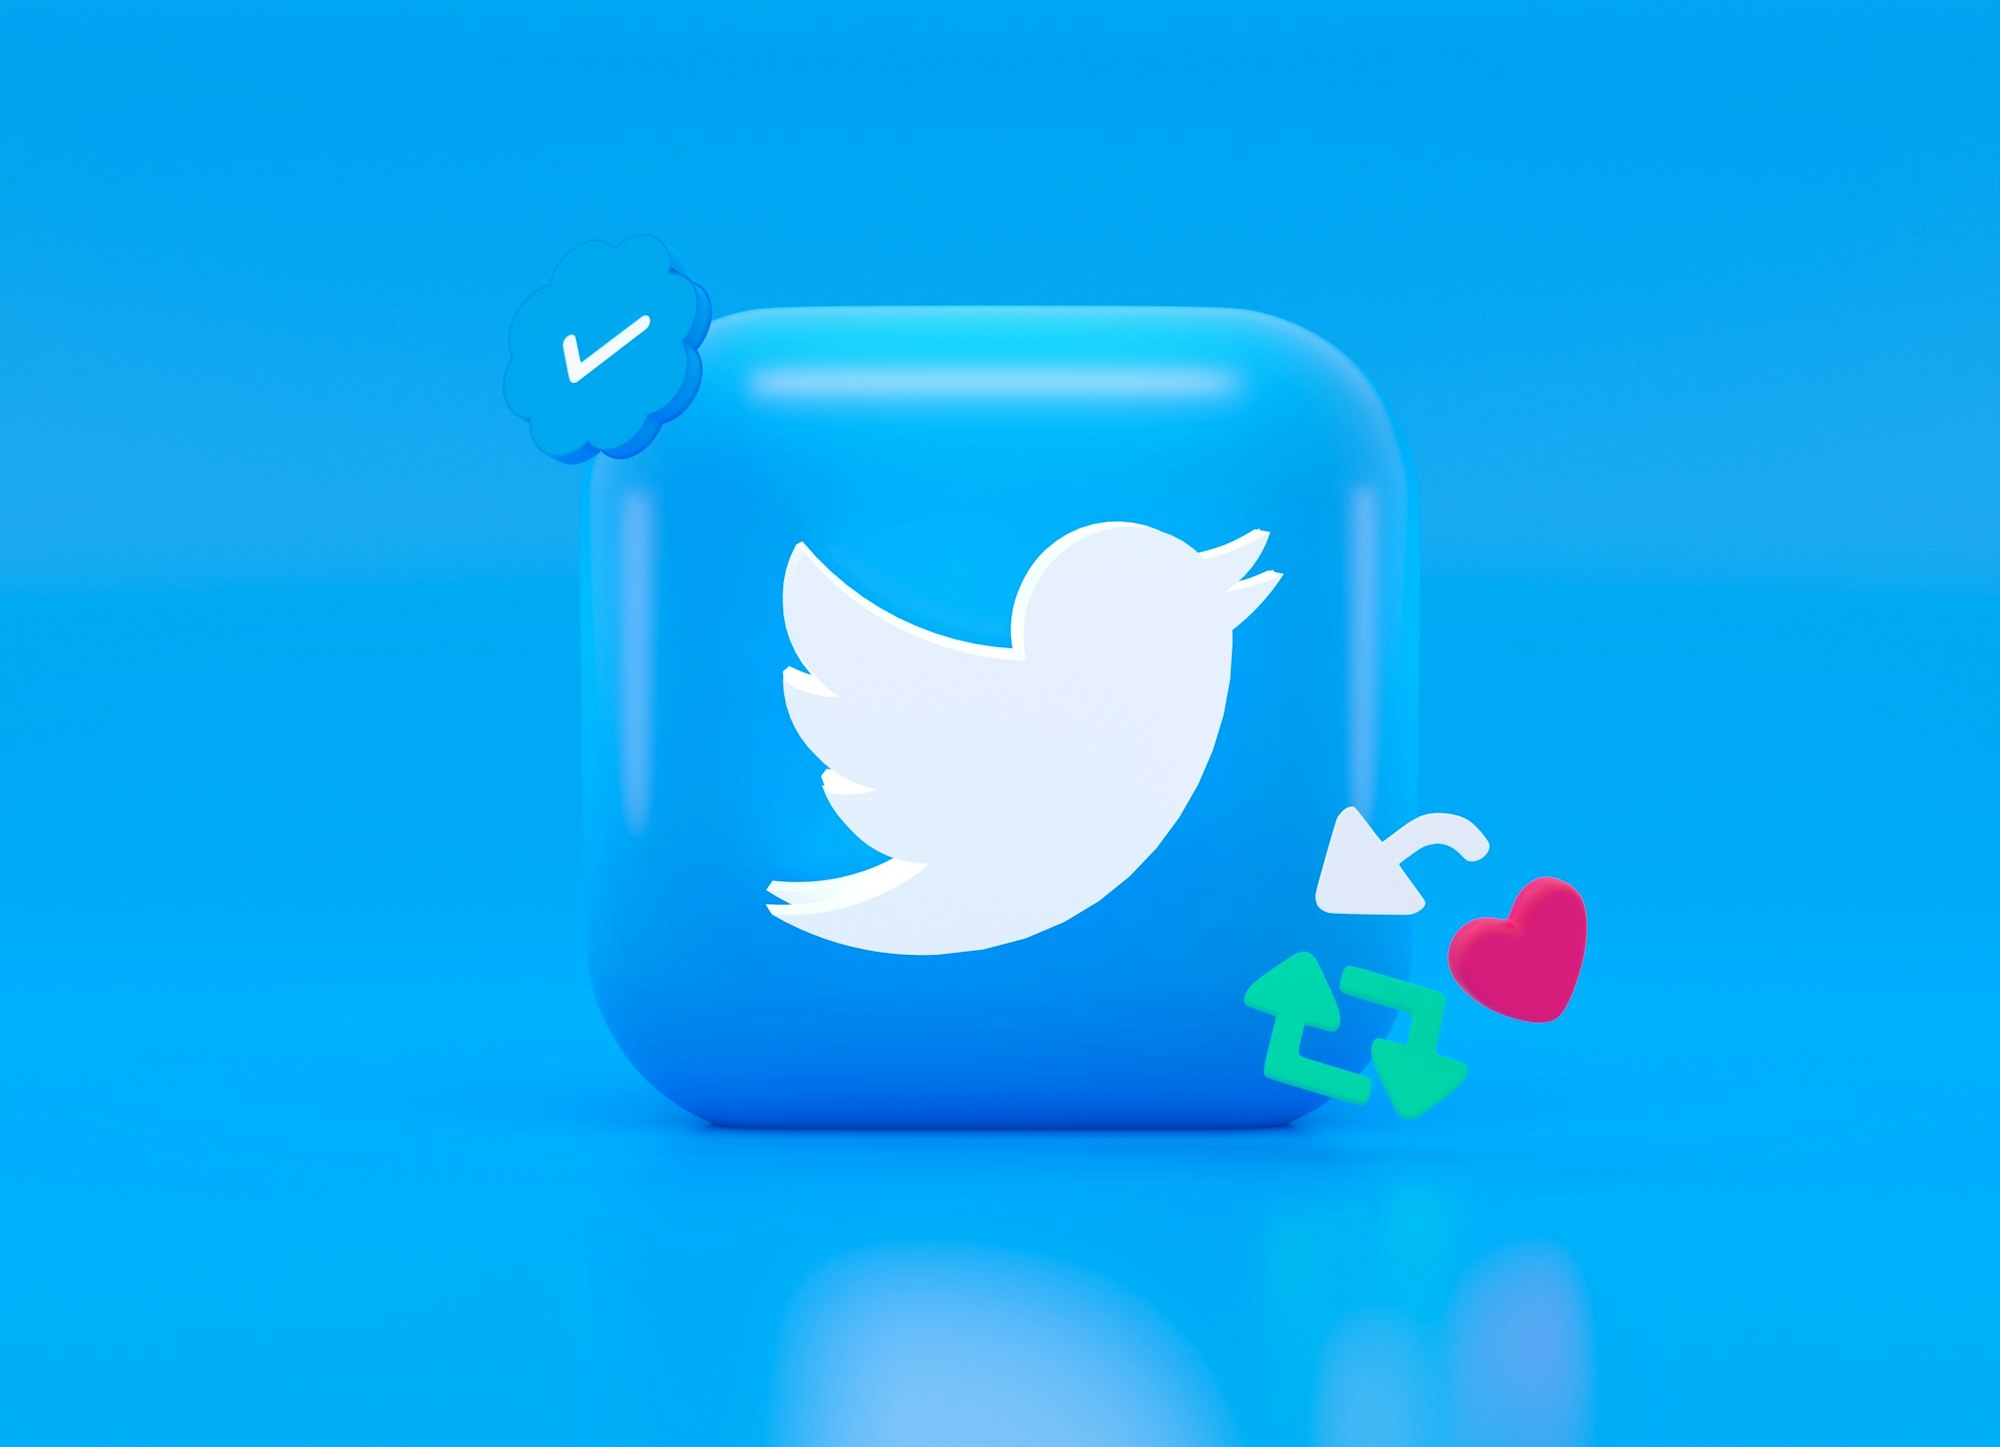 Twitter 3D icon. Feel free to contact me through email mariia.shalabaieva@gmail.com.
Check out my previous collections “Top Cryptocurrencies” and "Elon Musk" . 